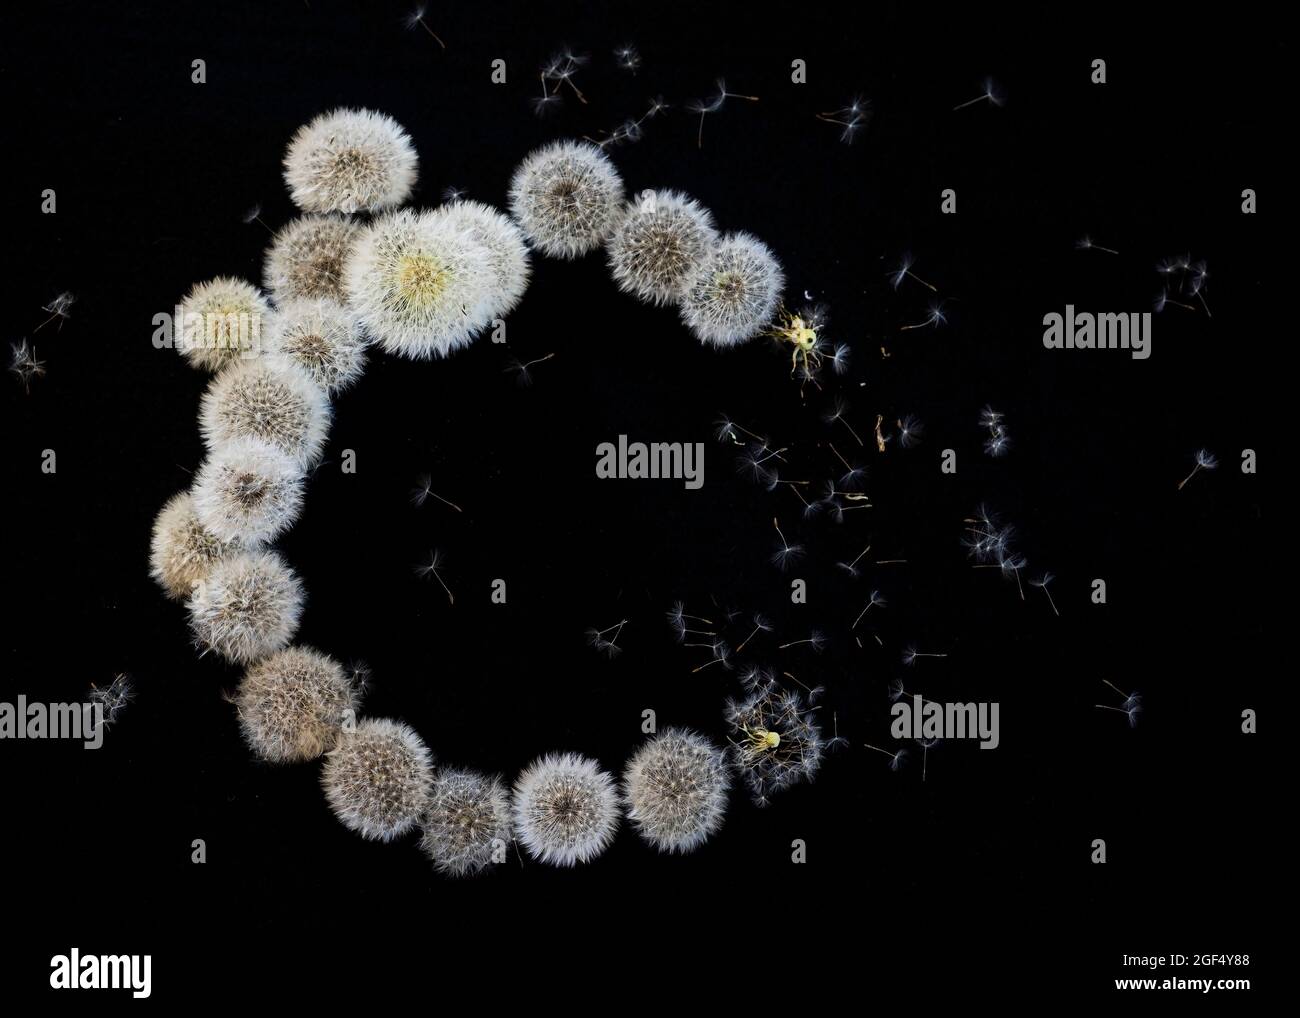 Crescent shape made of dandelion seed heads Stock Photo